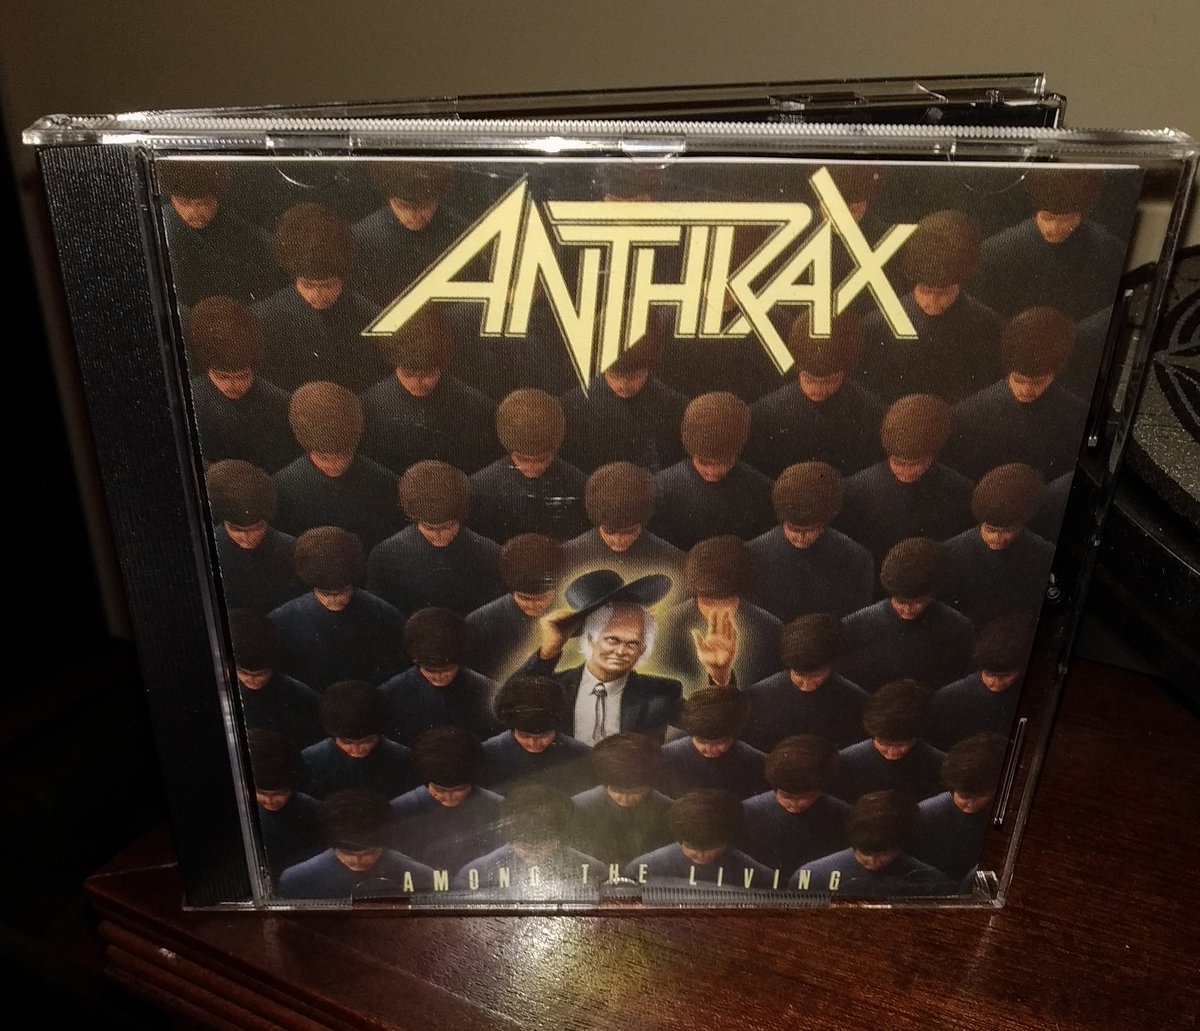 'Think before you speak
Or suffer for your words
Learn to give respect that others give to you
Oh, the best you can do' 🤎 🍻

#Anthrax #AmongTheLiving #NowPlaying #ThrashMetal #Playlist #Metal #PlayingNow #CD